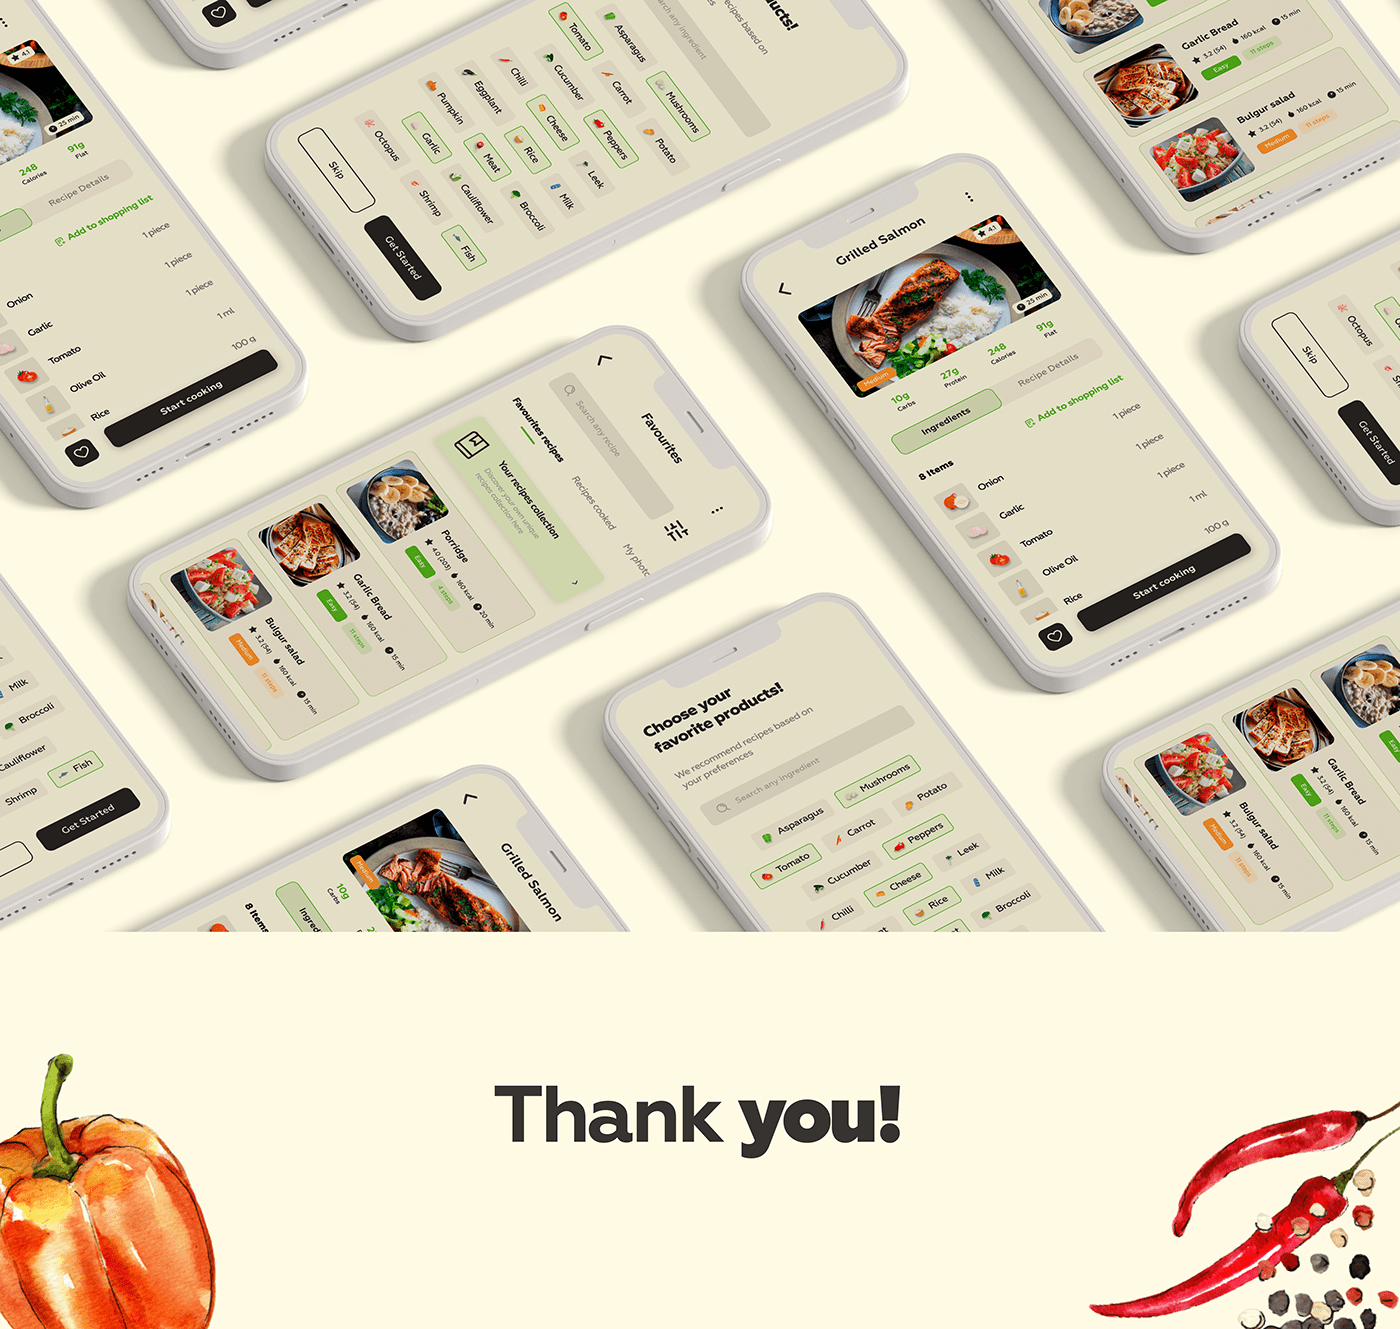 Case Study Figma healthy healthy food HumanCenteredDesign Mobile app UI/UX user experience user interface